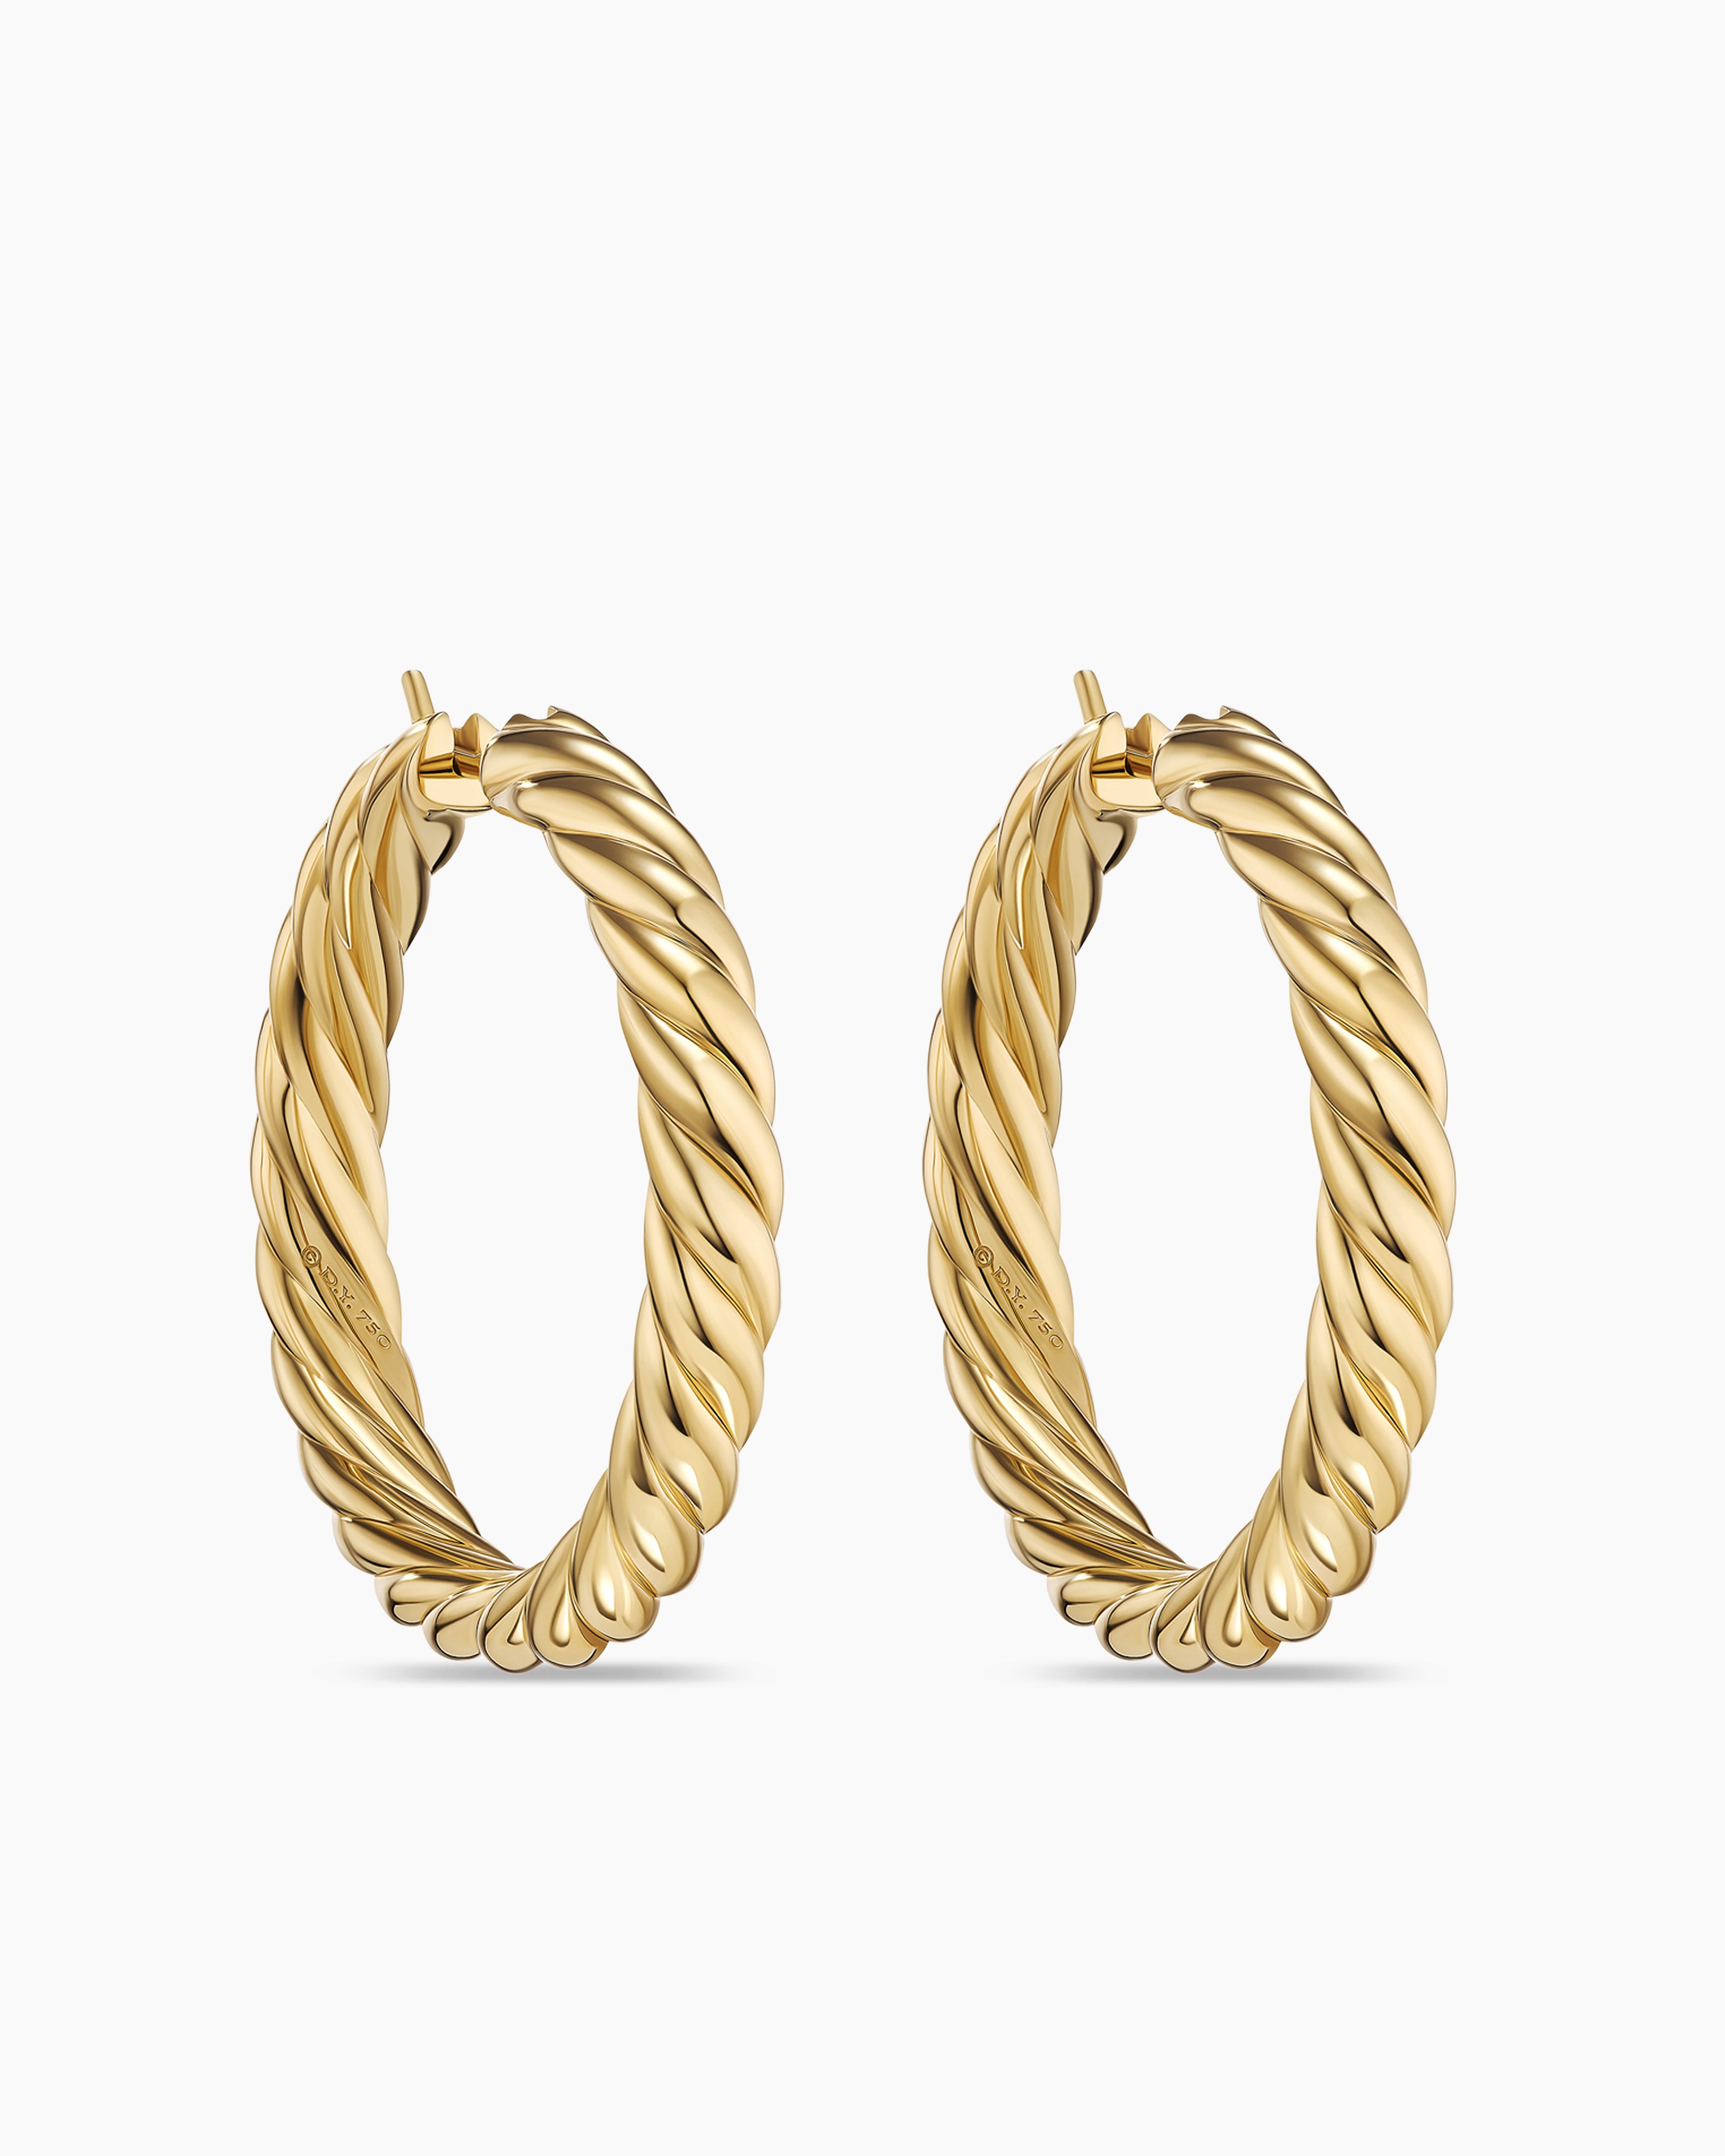 Sculpted Cable Hoop Earrings in 18K Yellow Gold, 38mm | David